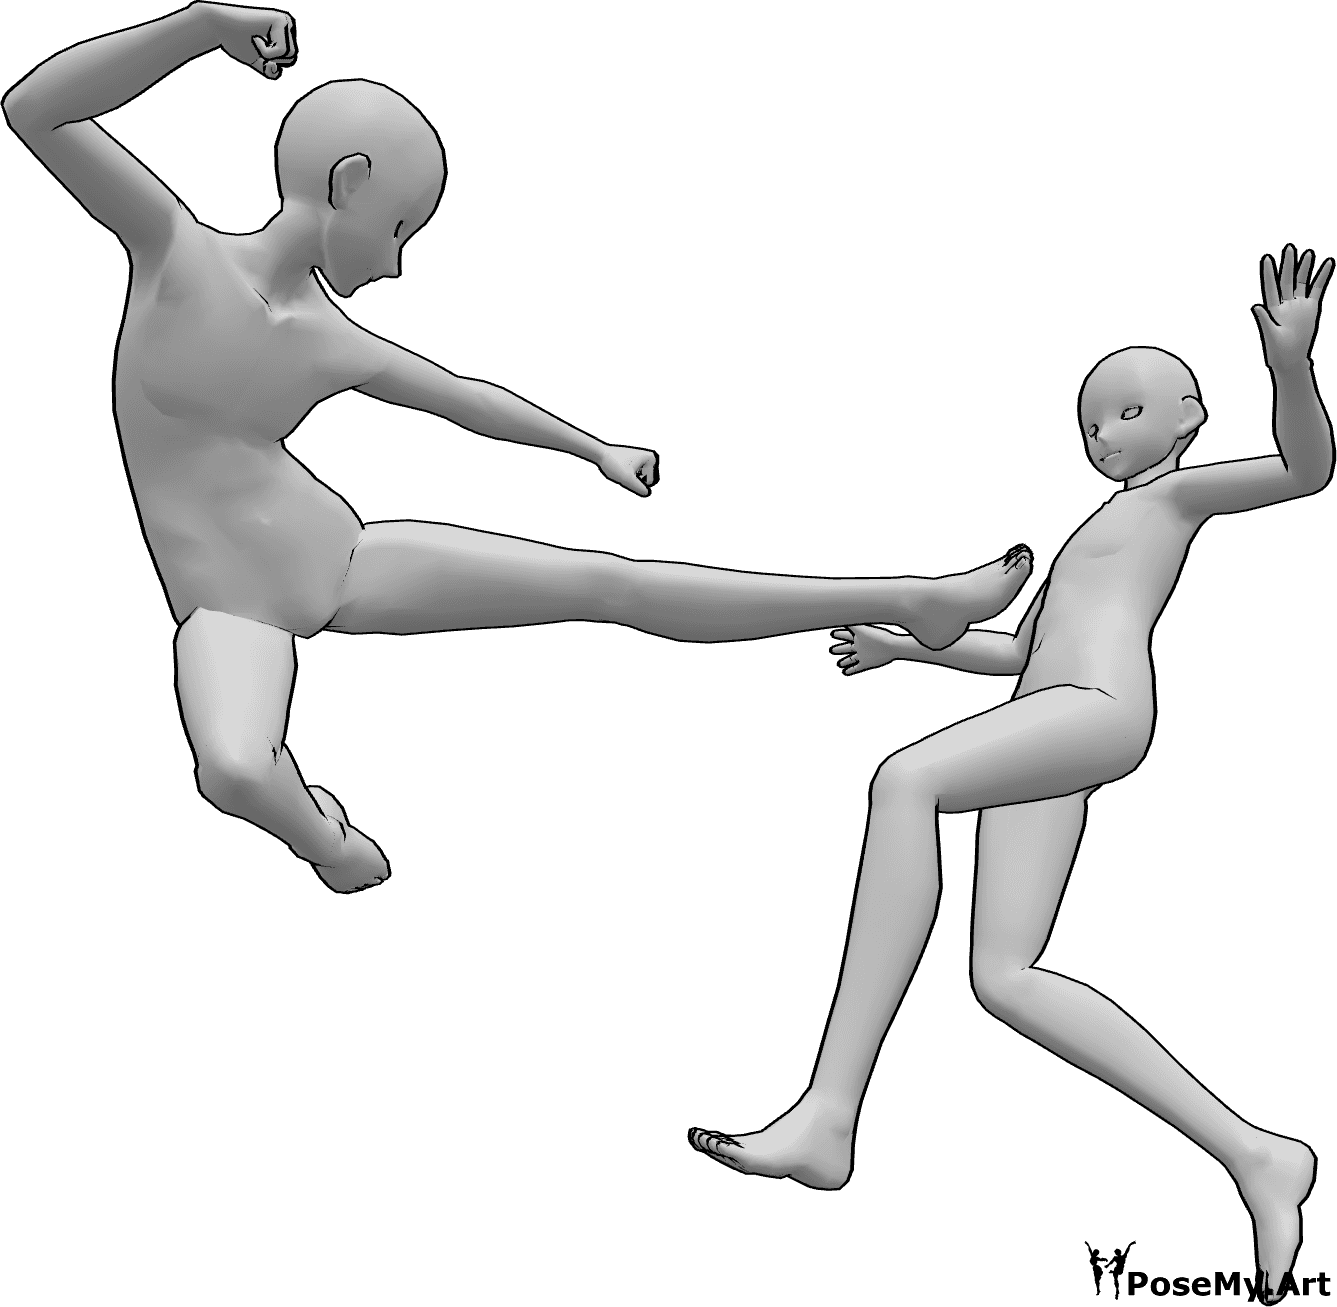 Pose Reference- Anime fighting kicking pose - Anime males are fighting, on of them jumps high to do a side kick